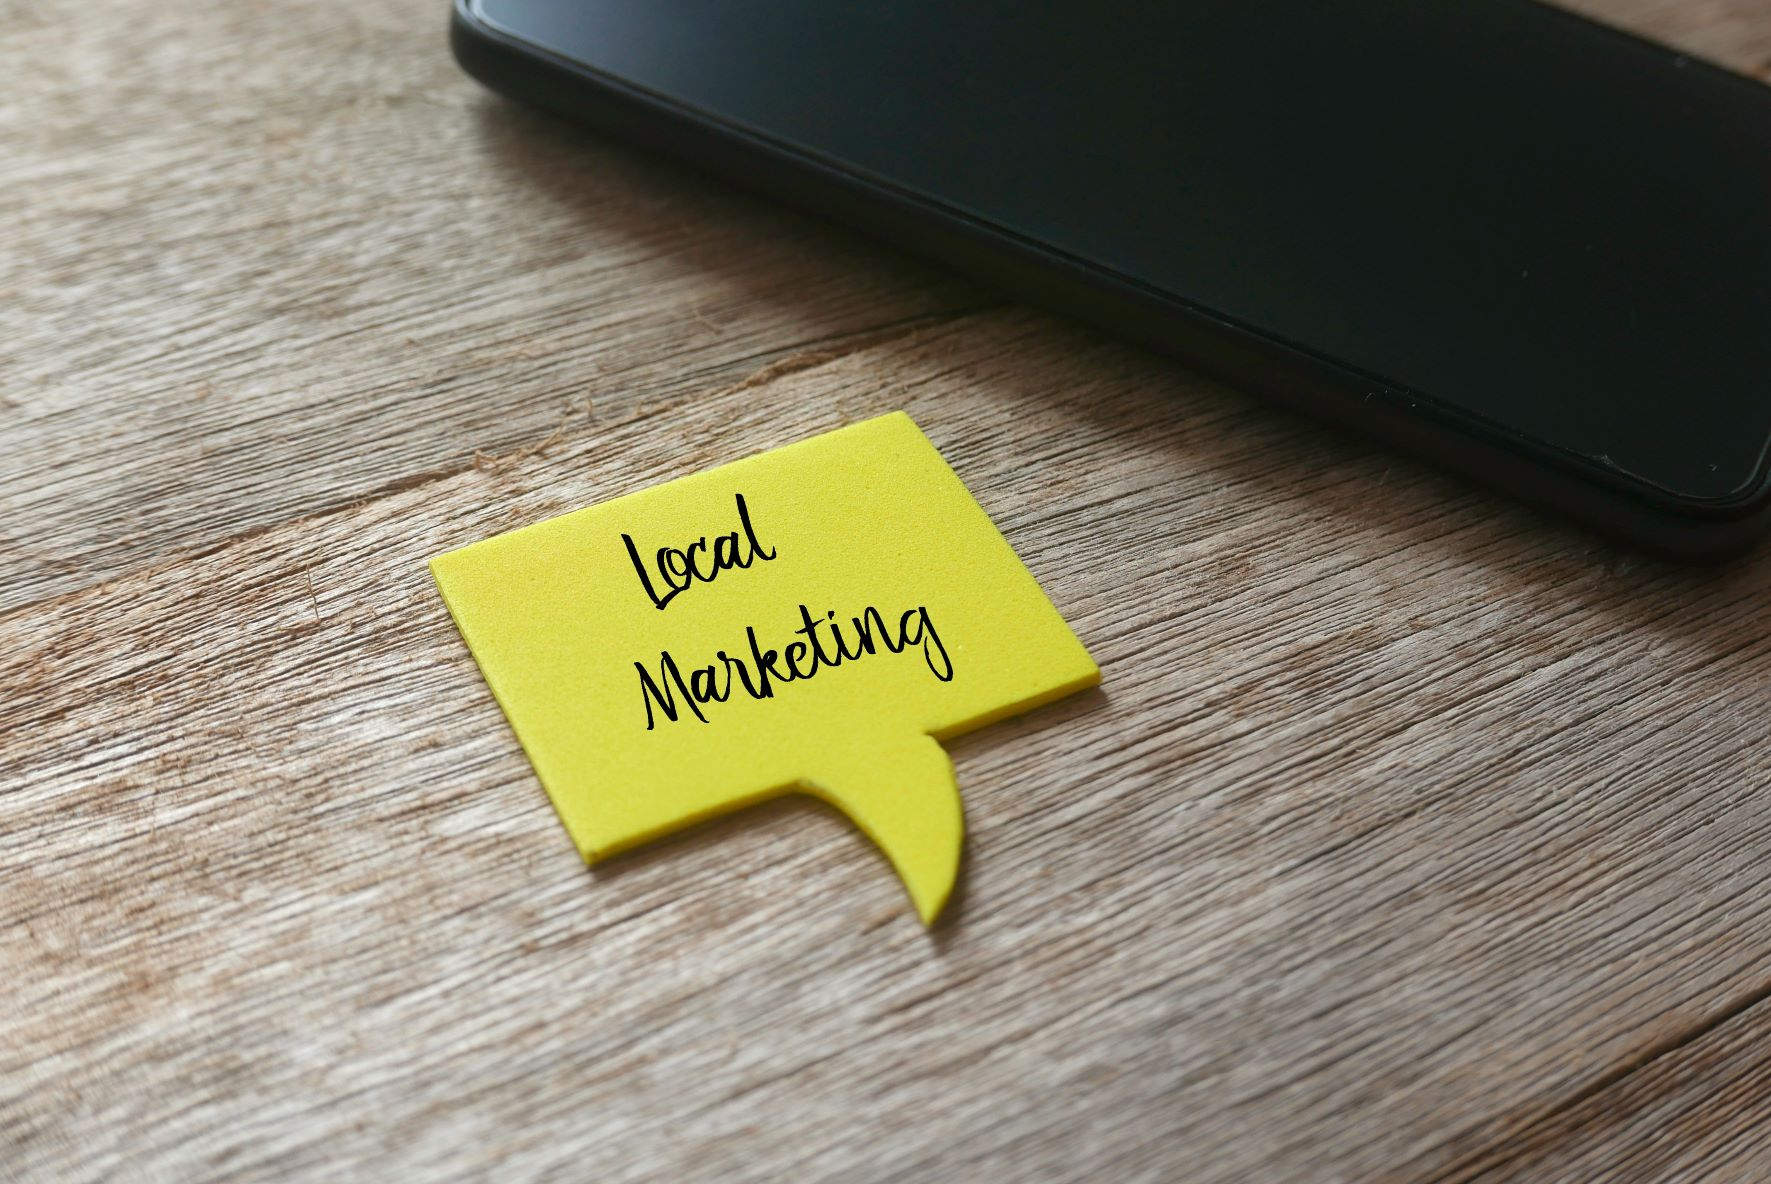 Local Search Engine Marketing Is Critical for Success